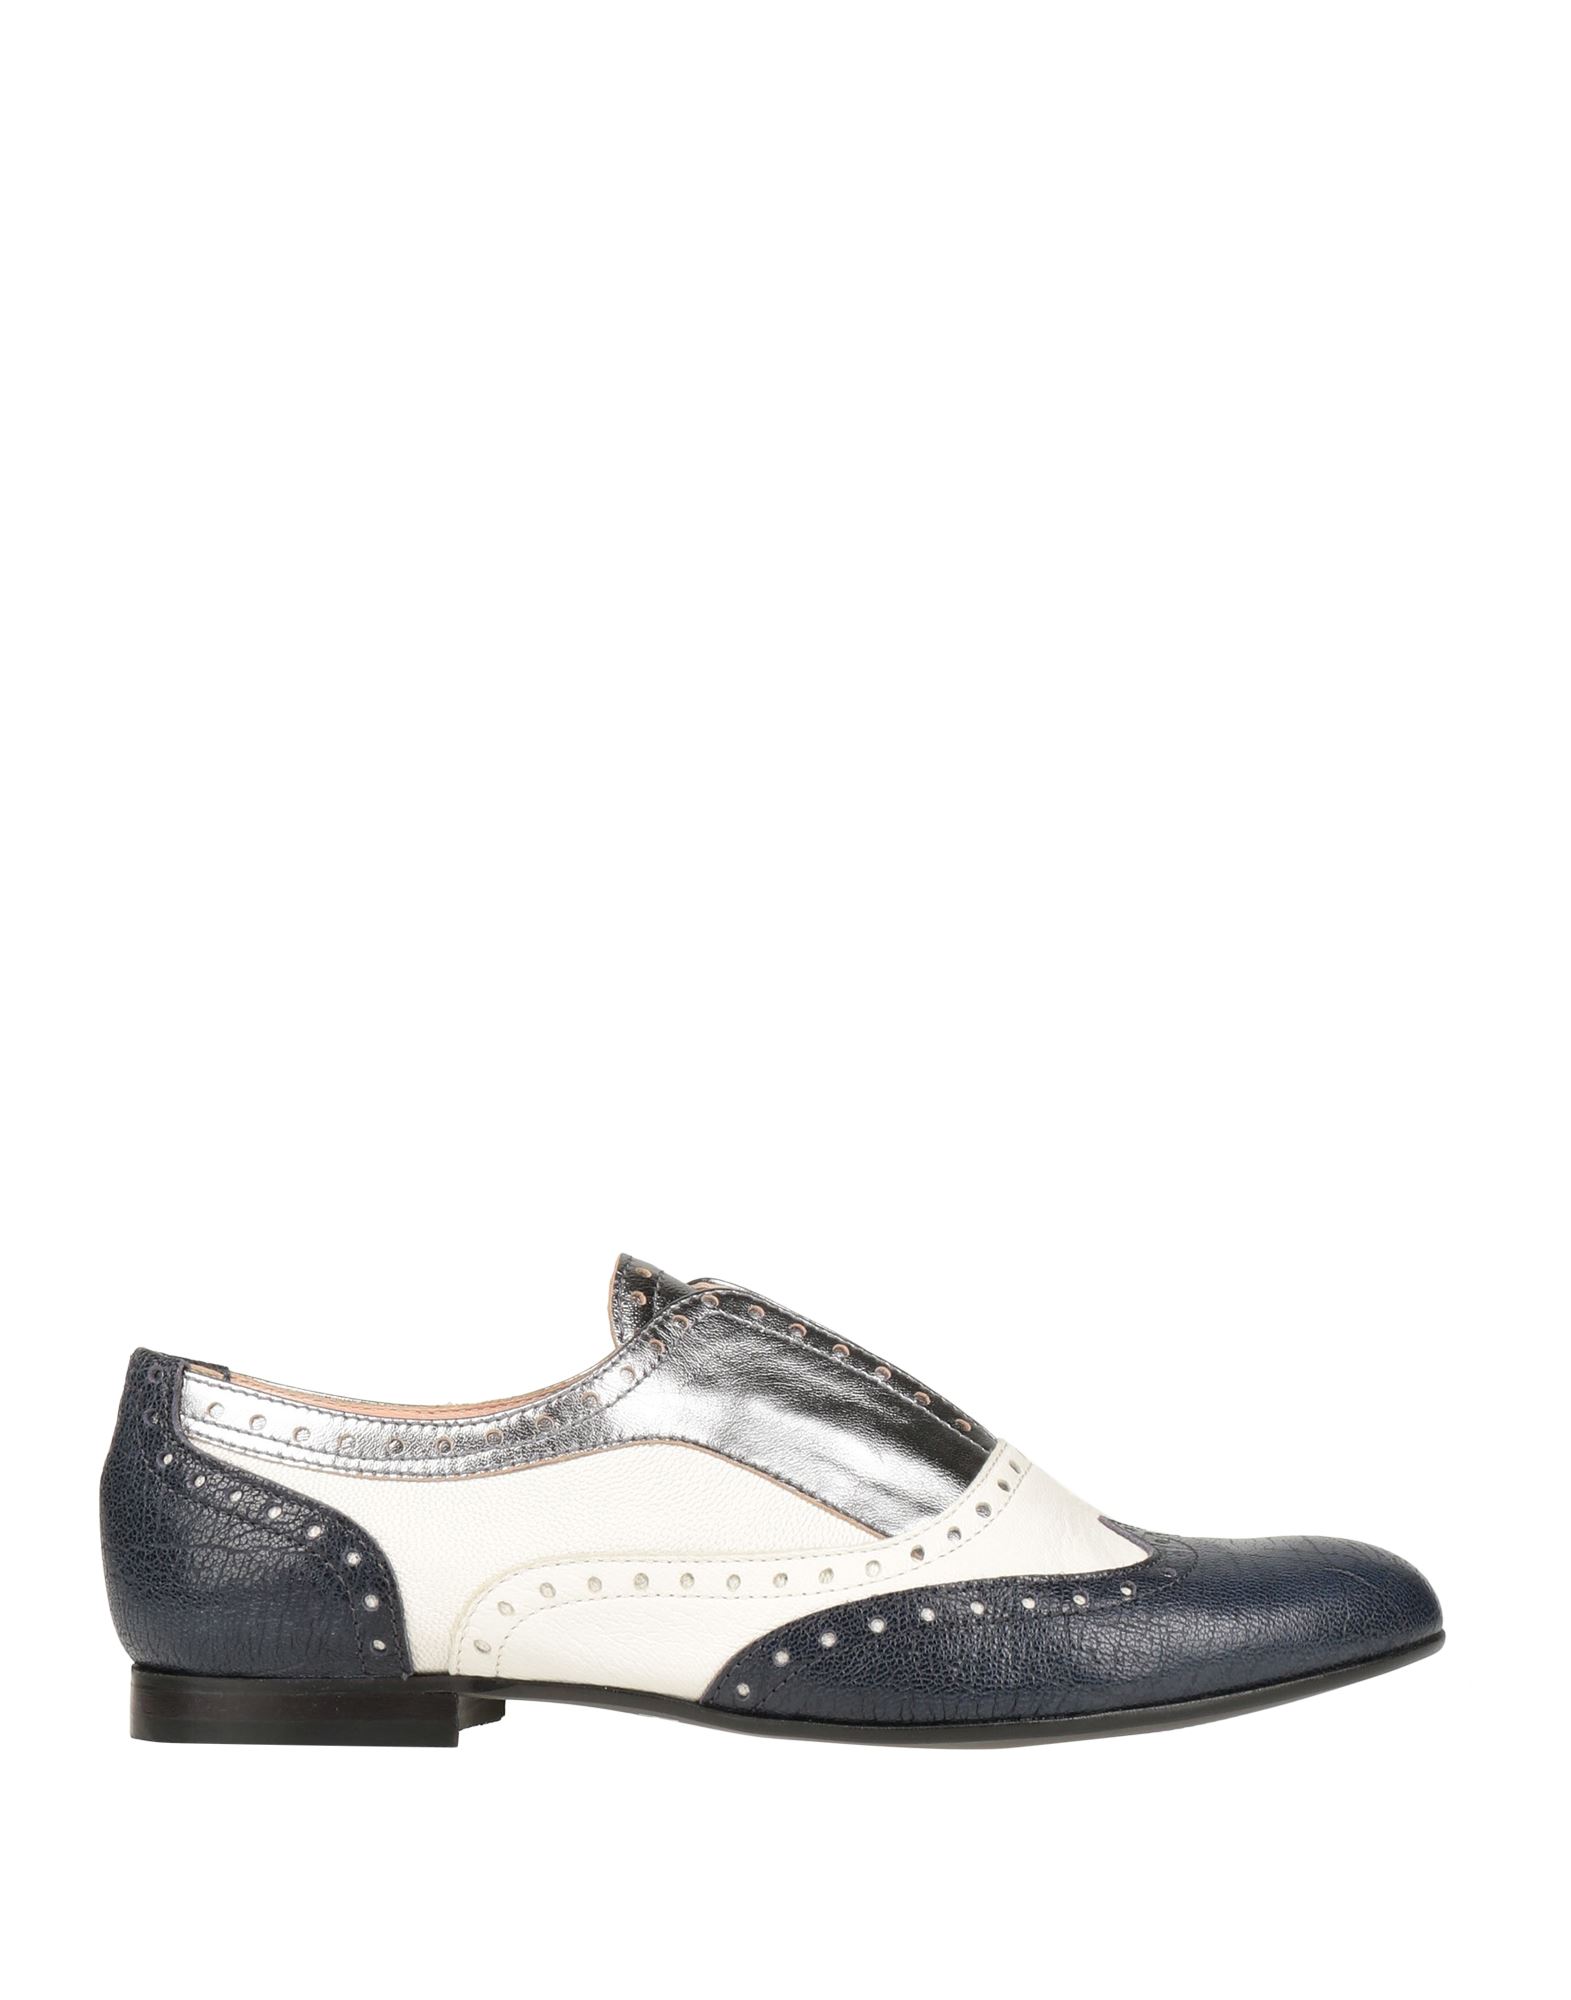 Pollini Lace-up Shoes In Navy Blue